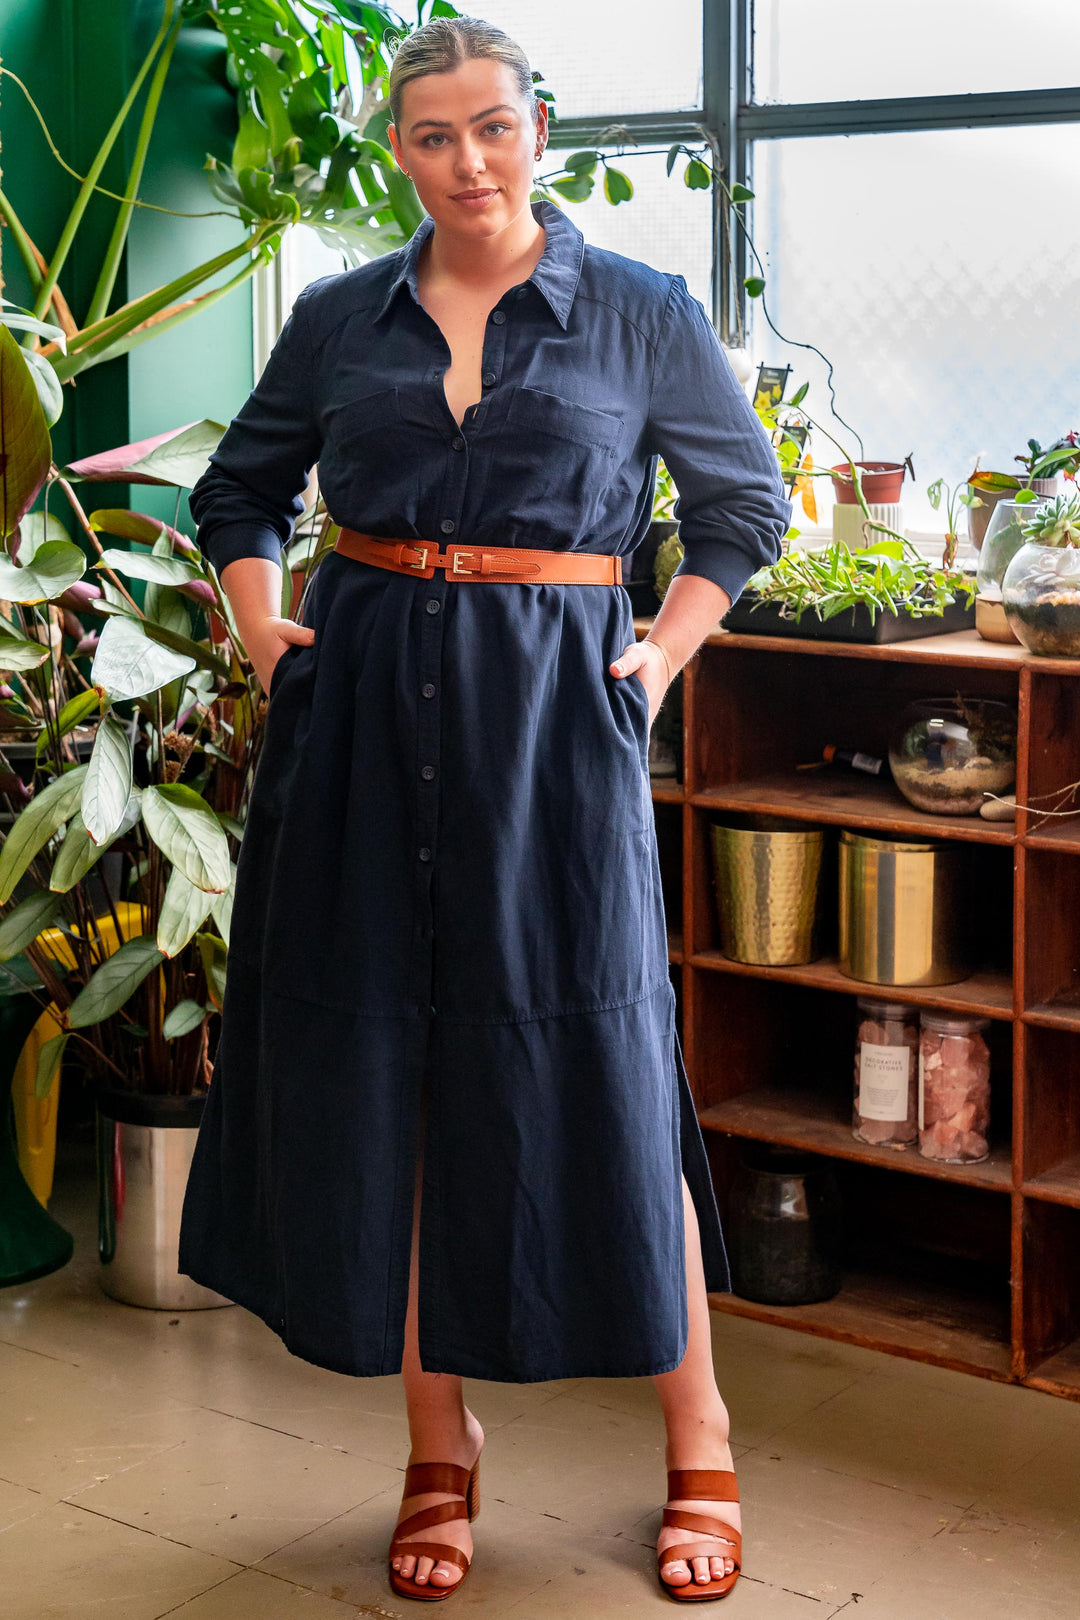 Seasons of Love Linen Dress in Linen Gray [ONLINE ONLY] - First Stitch